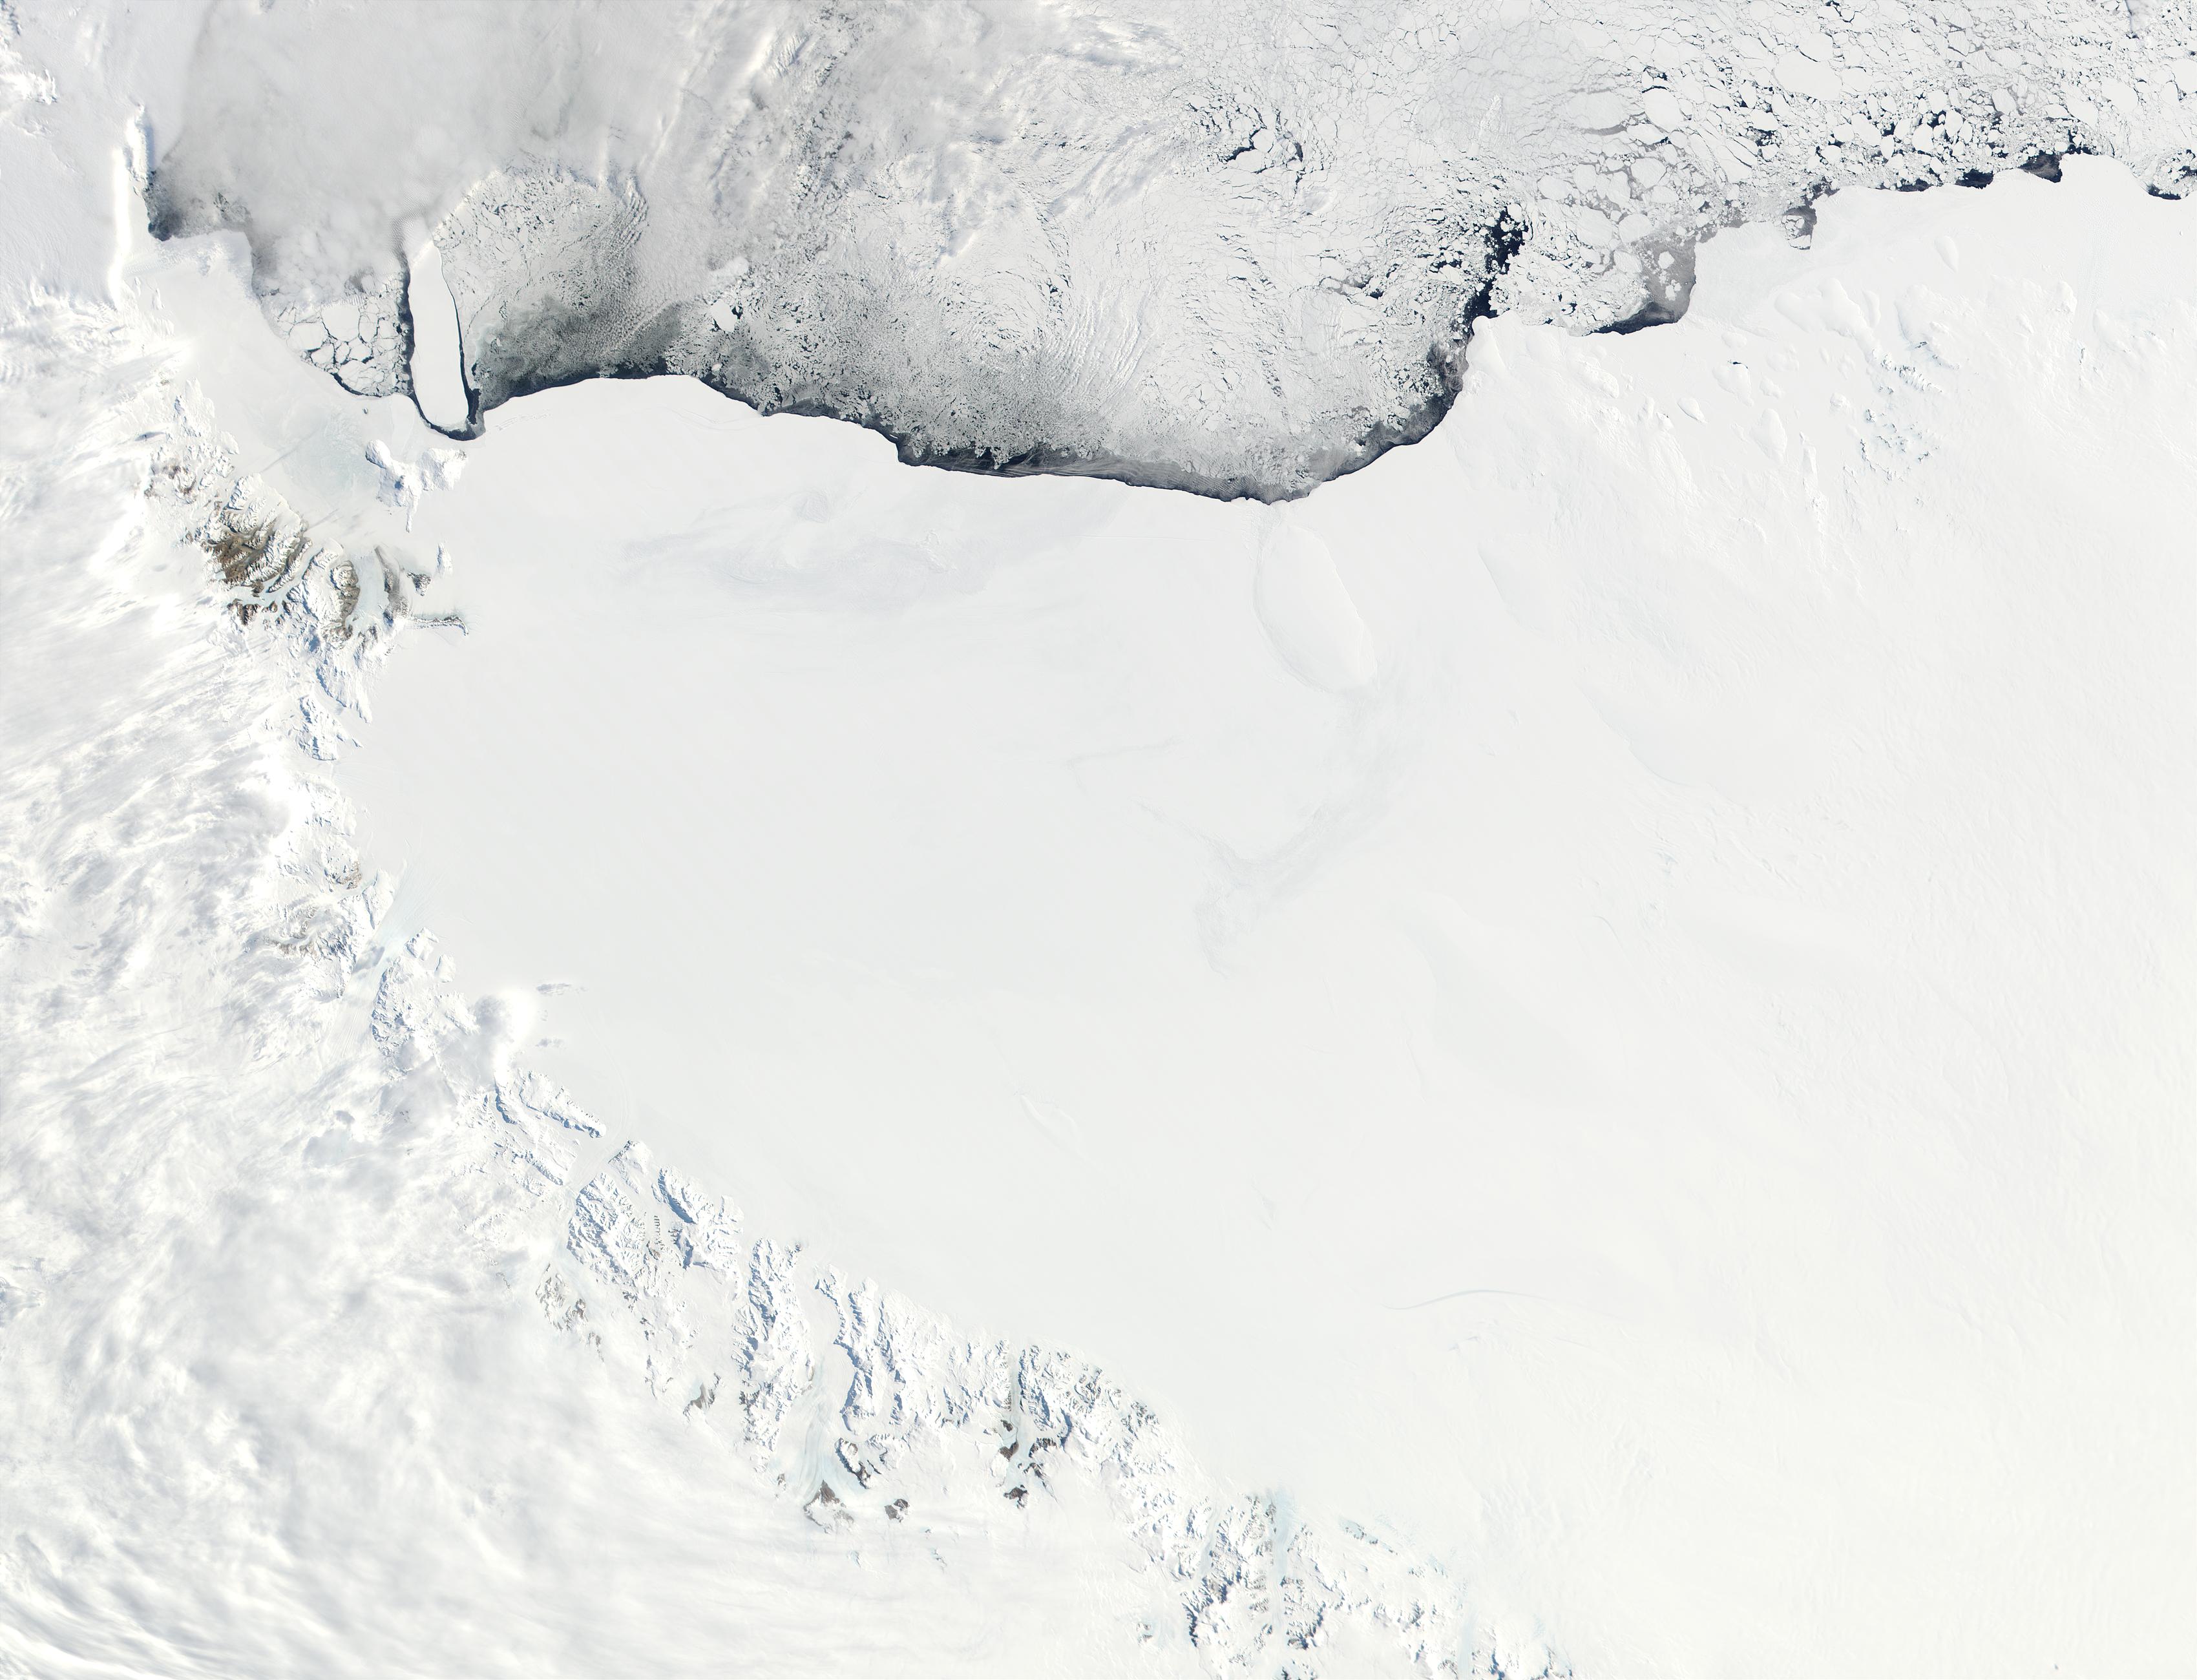 Ross Ice Shelf and Saunders Coast, Antarctica - related image preview